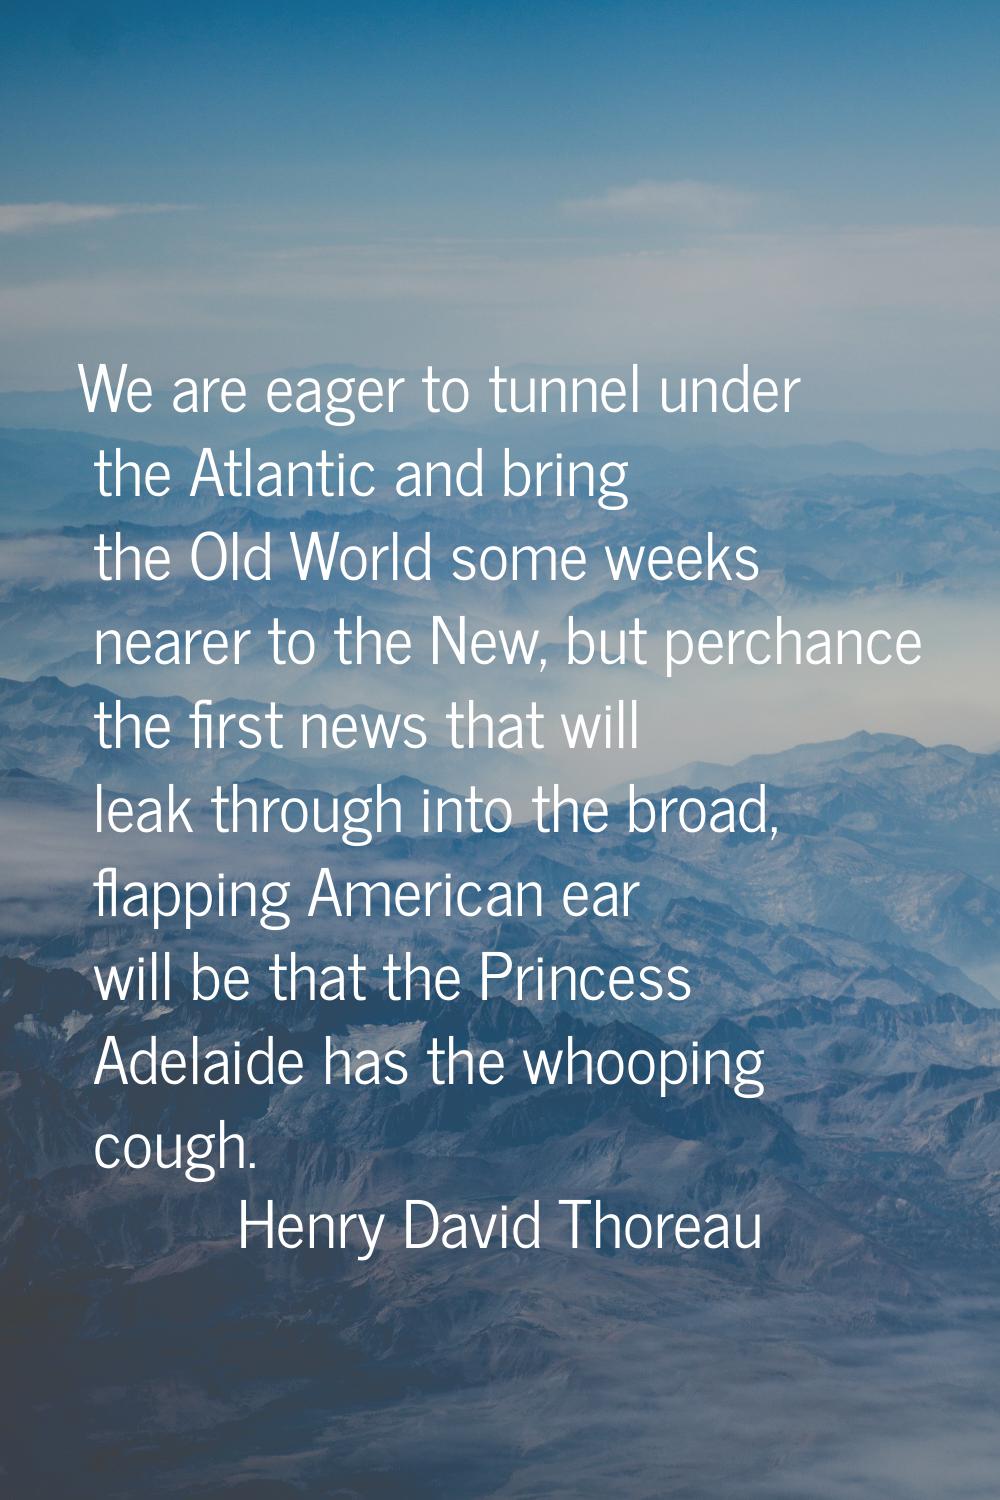 We are eager to tunnel under the Atlantic and bring the Old World some weeks nearer to the New, but